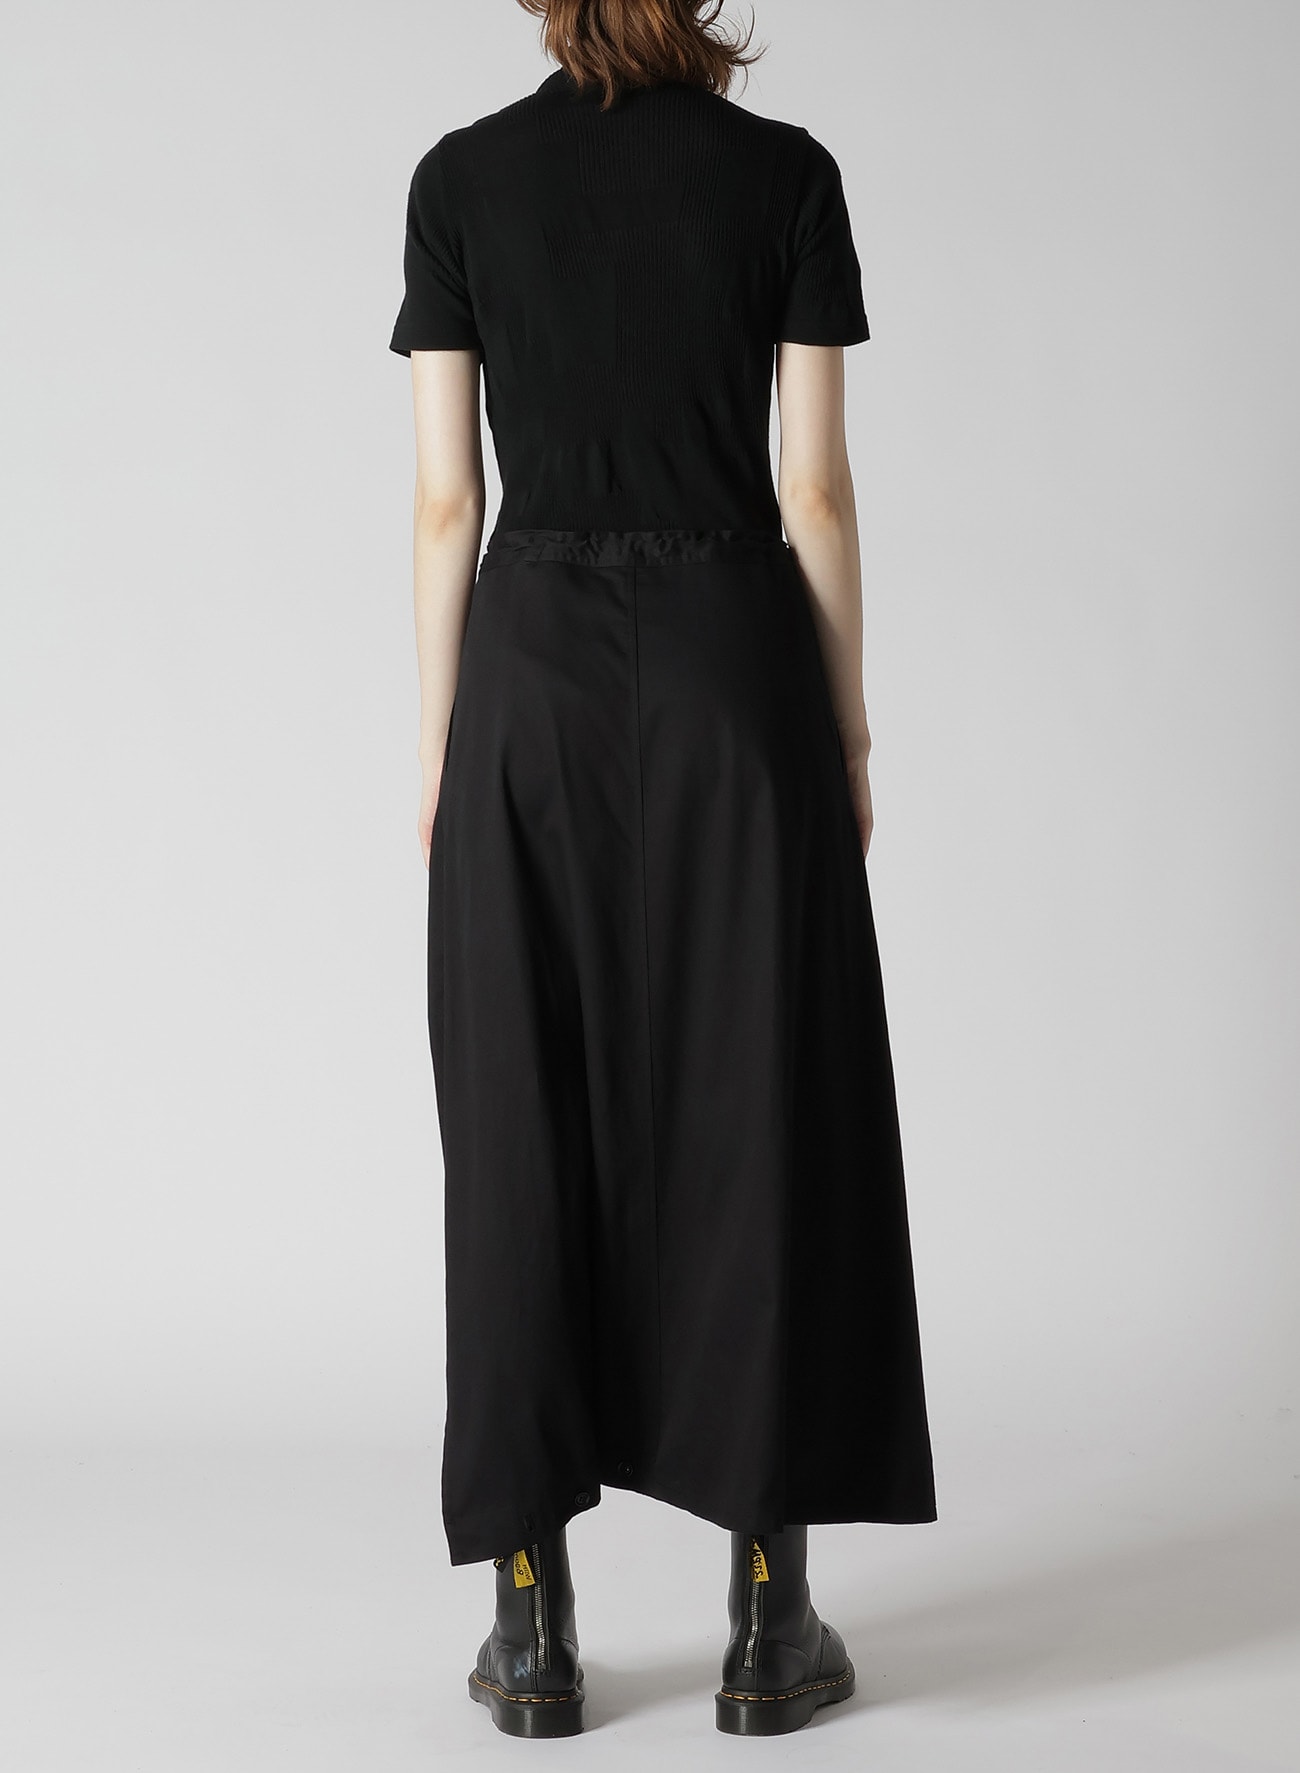 Y's BORN PRODUCT] COTTON TWILL SKIRT PANTS(XS Black): Y's｜THE 